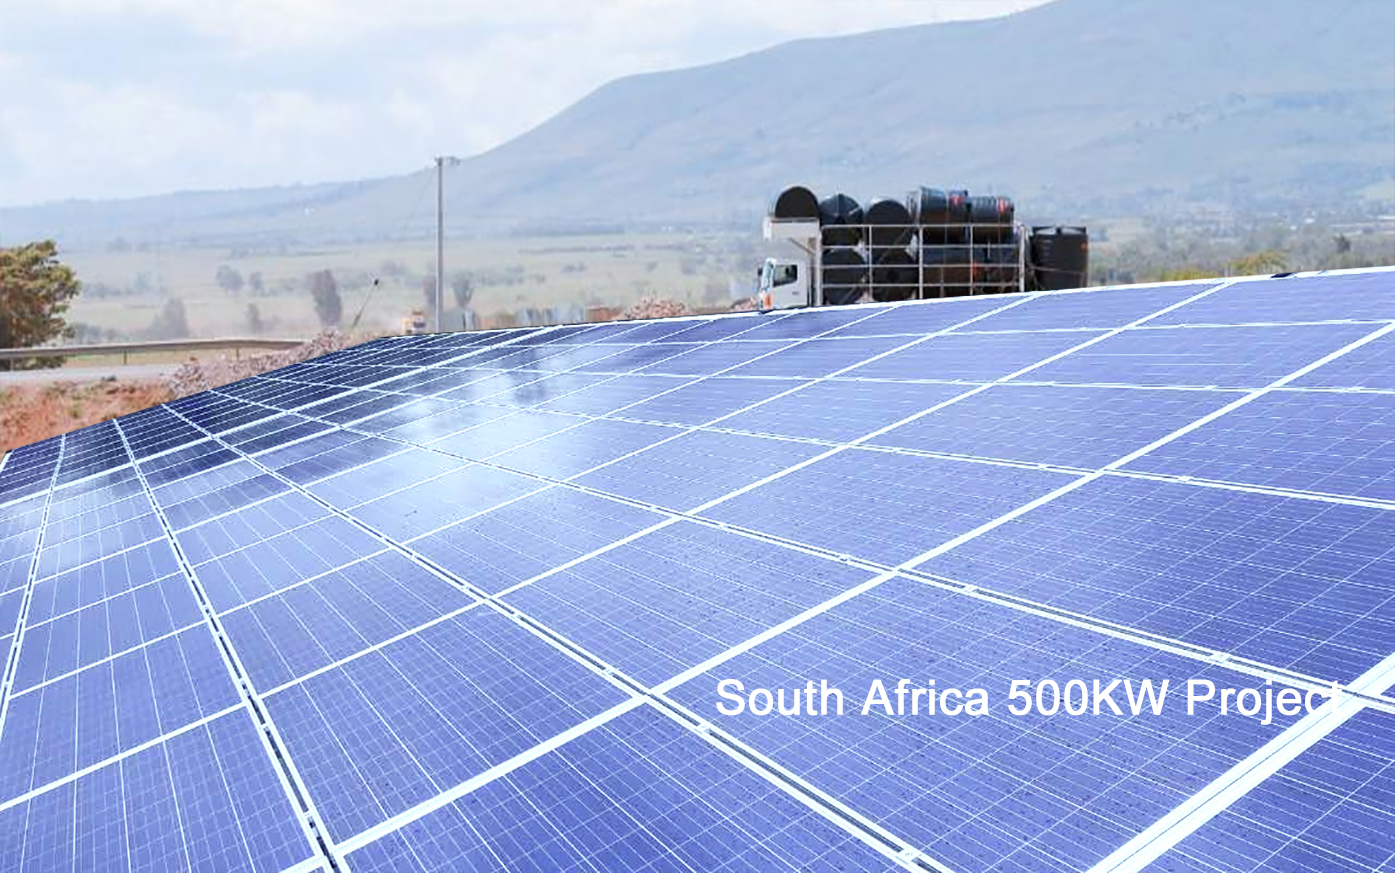 500KW South Africa Project